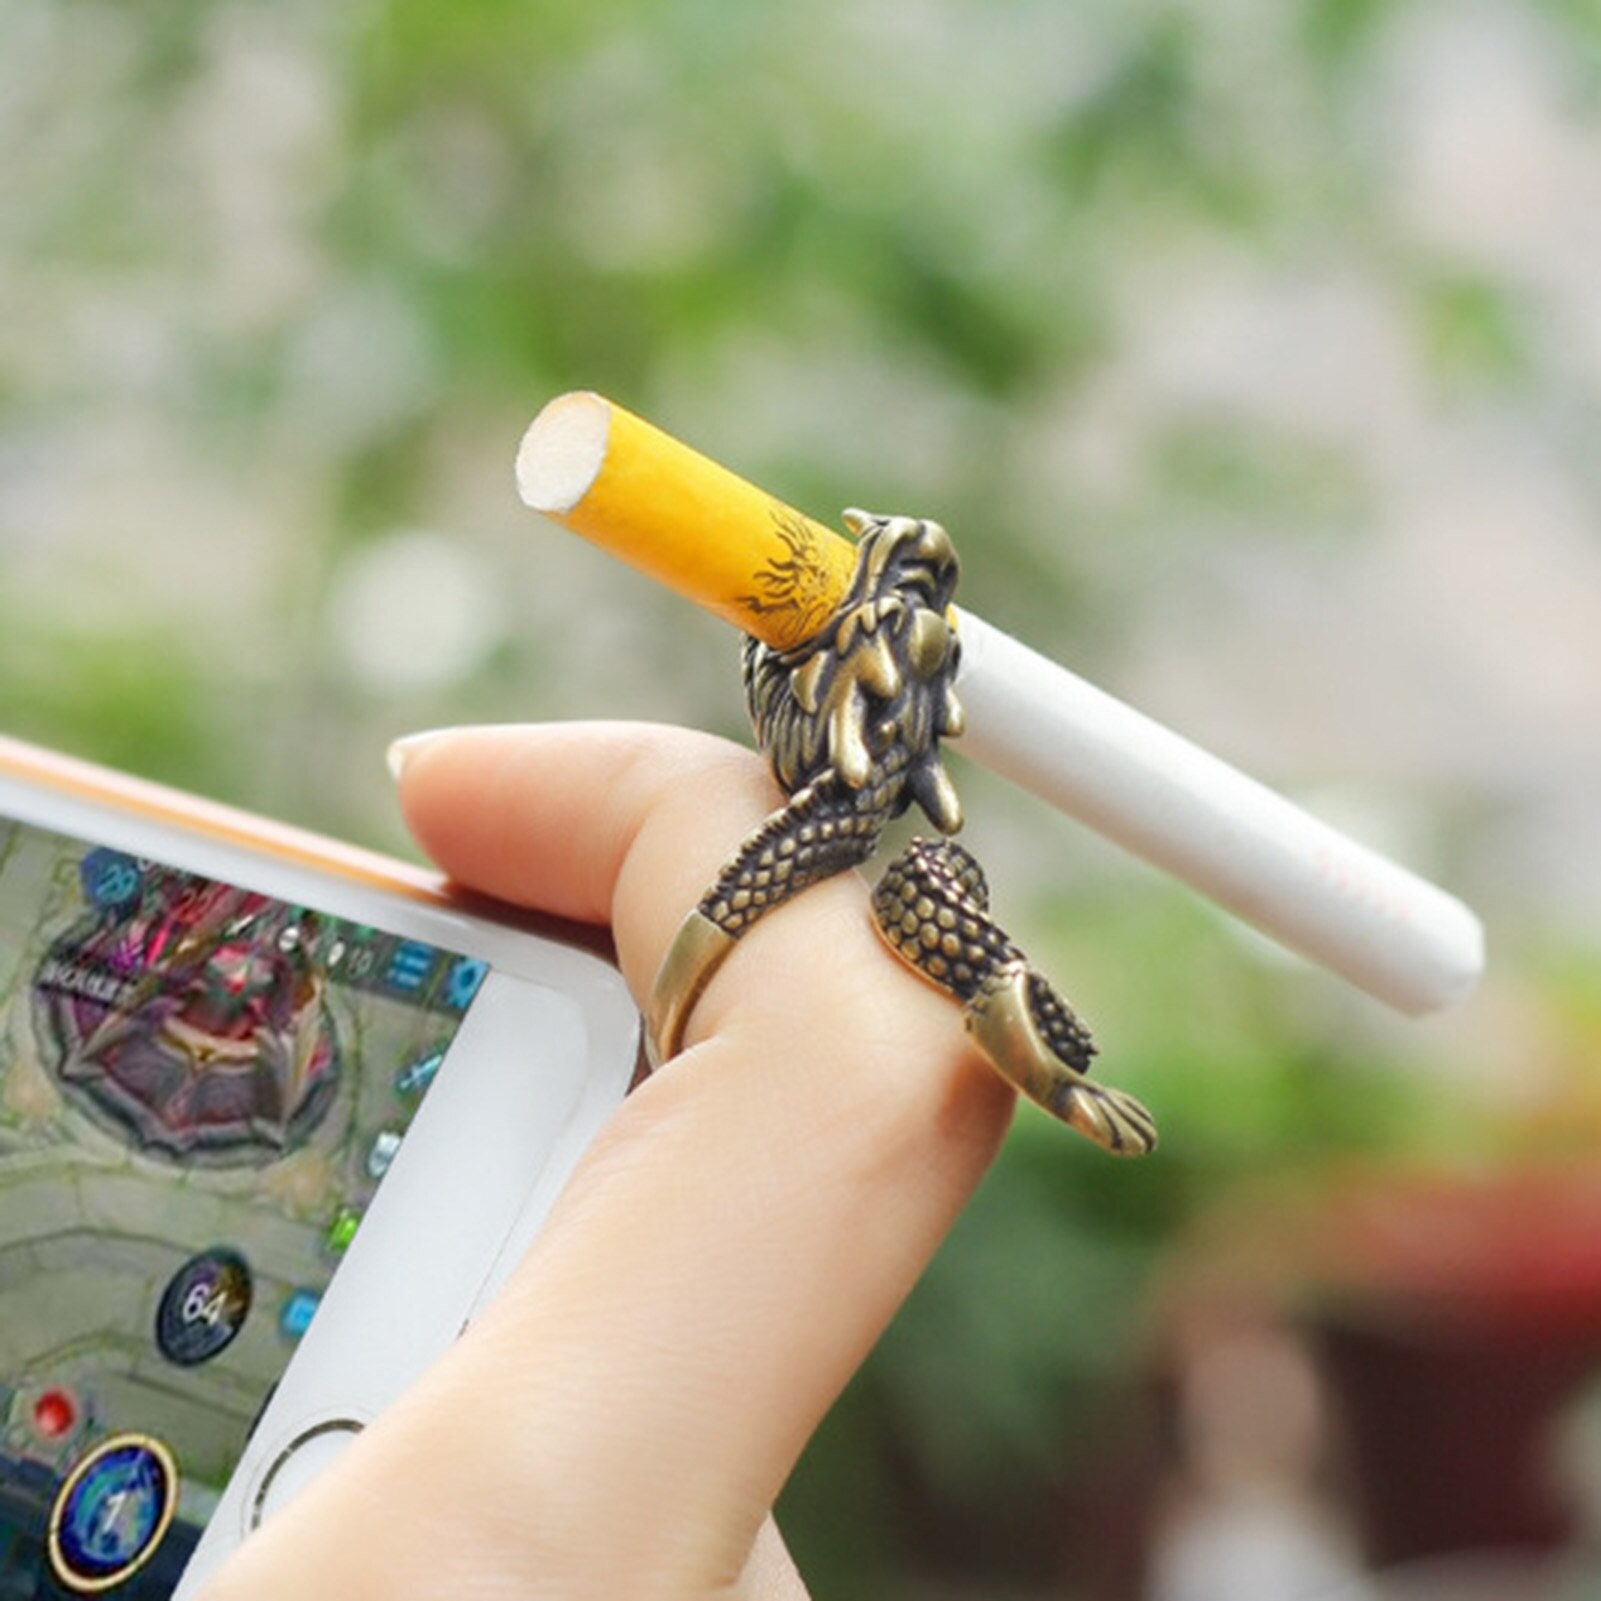 Finger Clip Cigarettes Holder Ring, Butterfly Cigarette Holder Ring,  Cigarette Holder For Finger Clip Smoking Accessories Gift for her